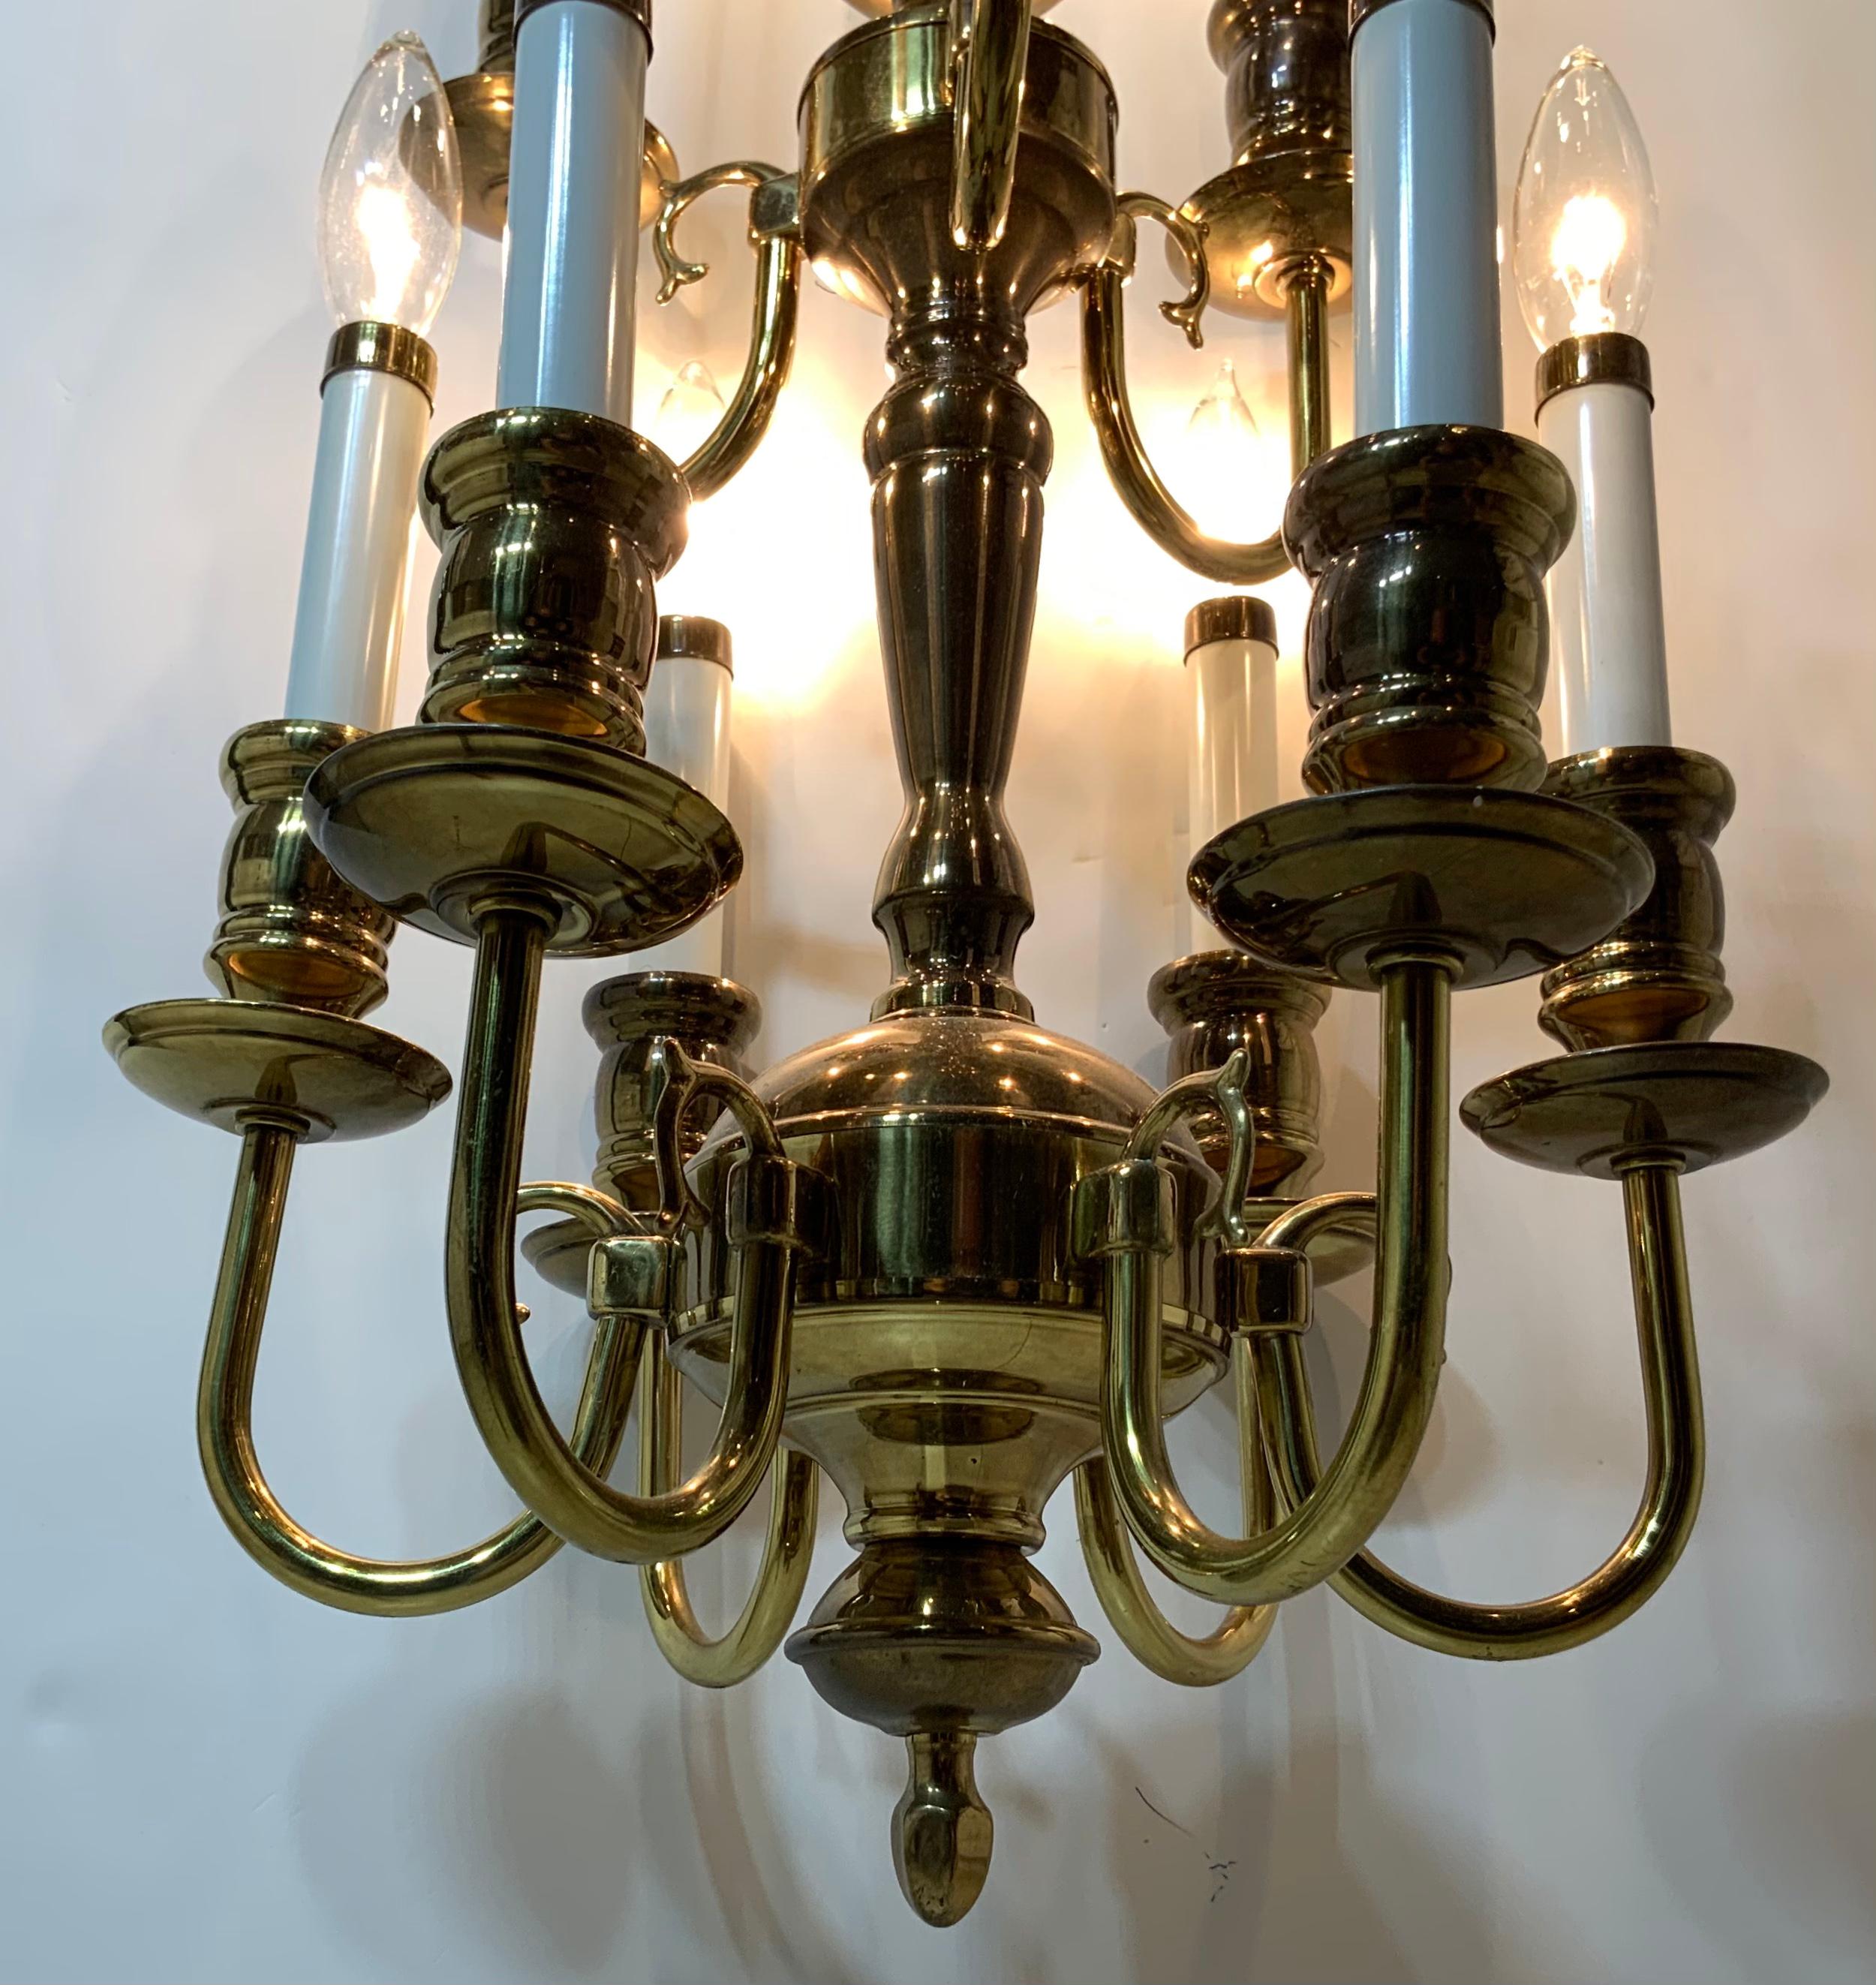 Elegant hanging chandelier made of solid brass with scrolled Ares, nine-light 60/watt each electrified and ready to use. Original canopy included.